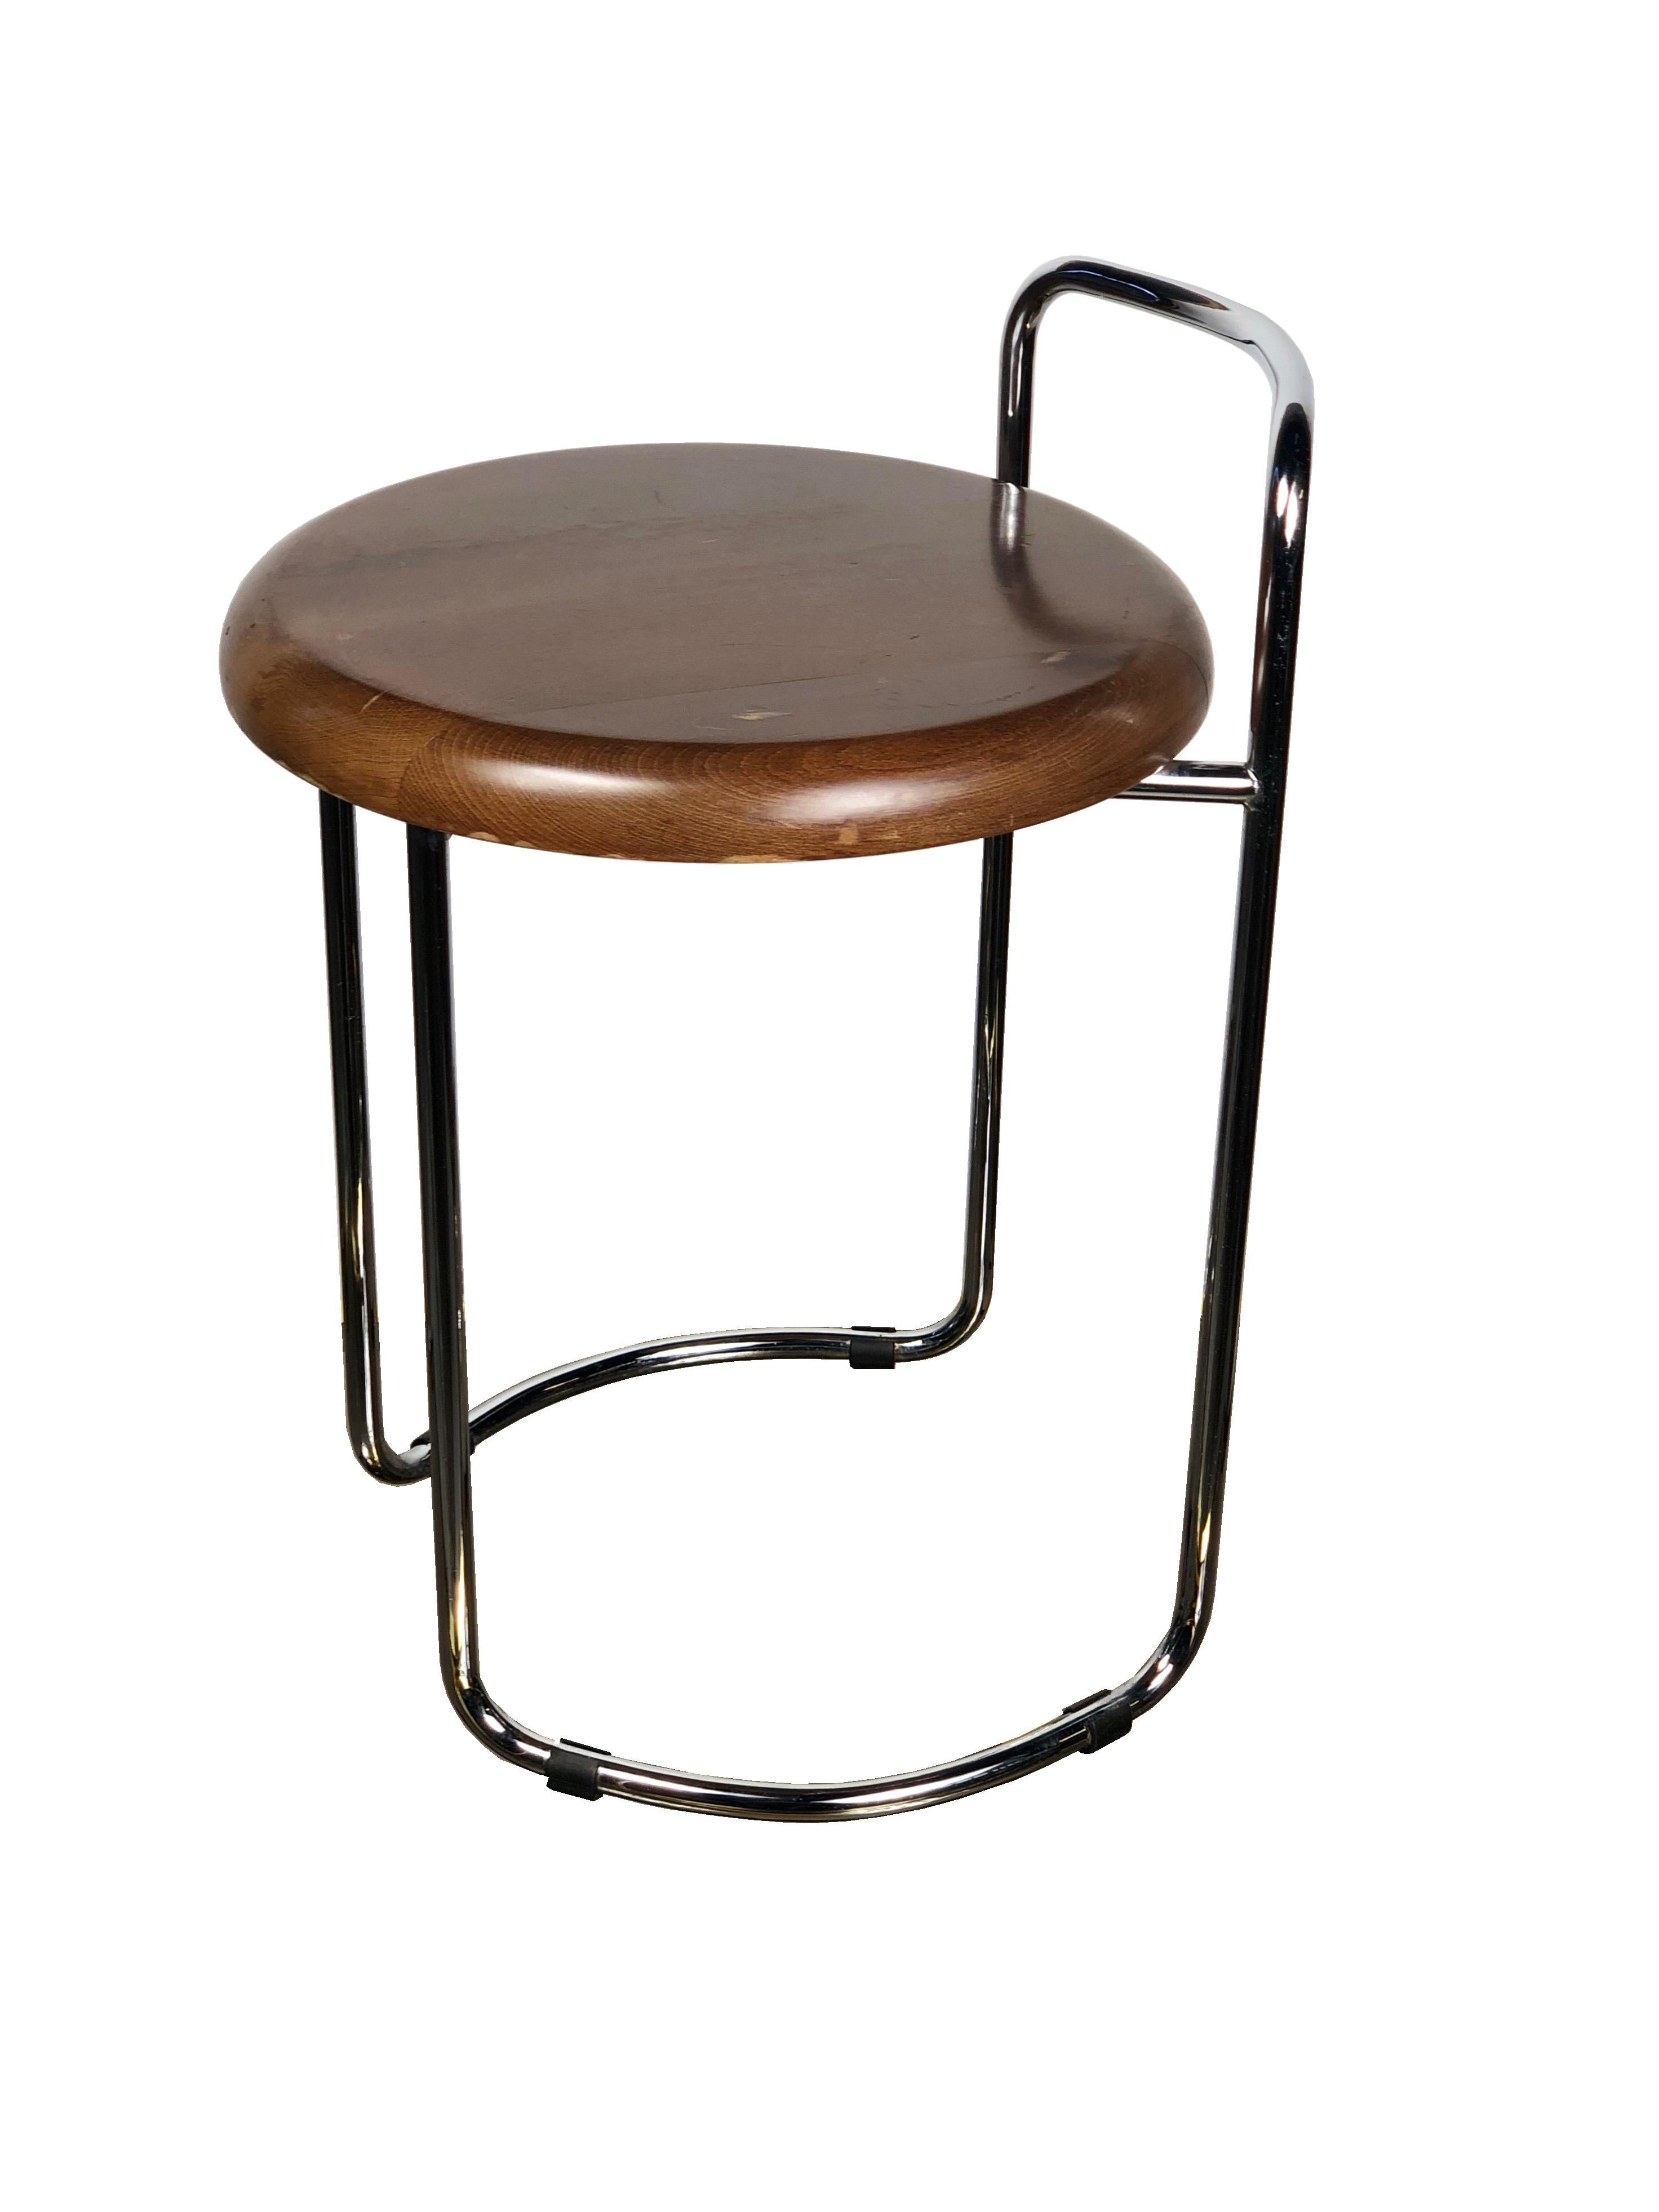 Vintage Bauhaus stool with a tubular chrome base and a wooden seat. Italy, 1960s.